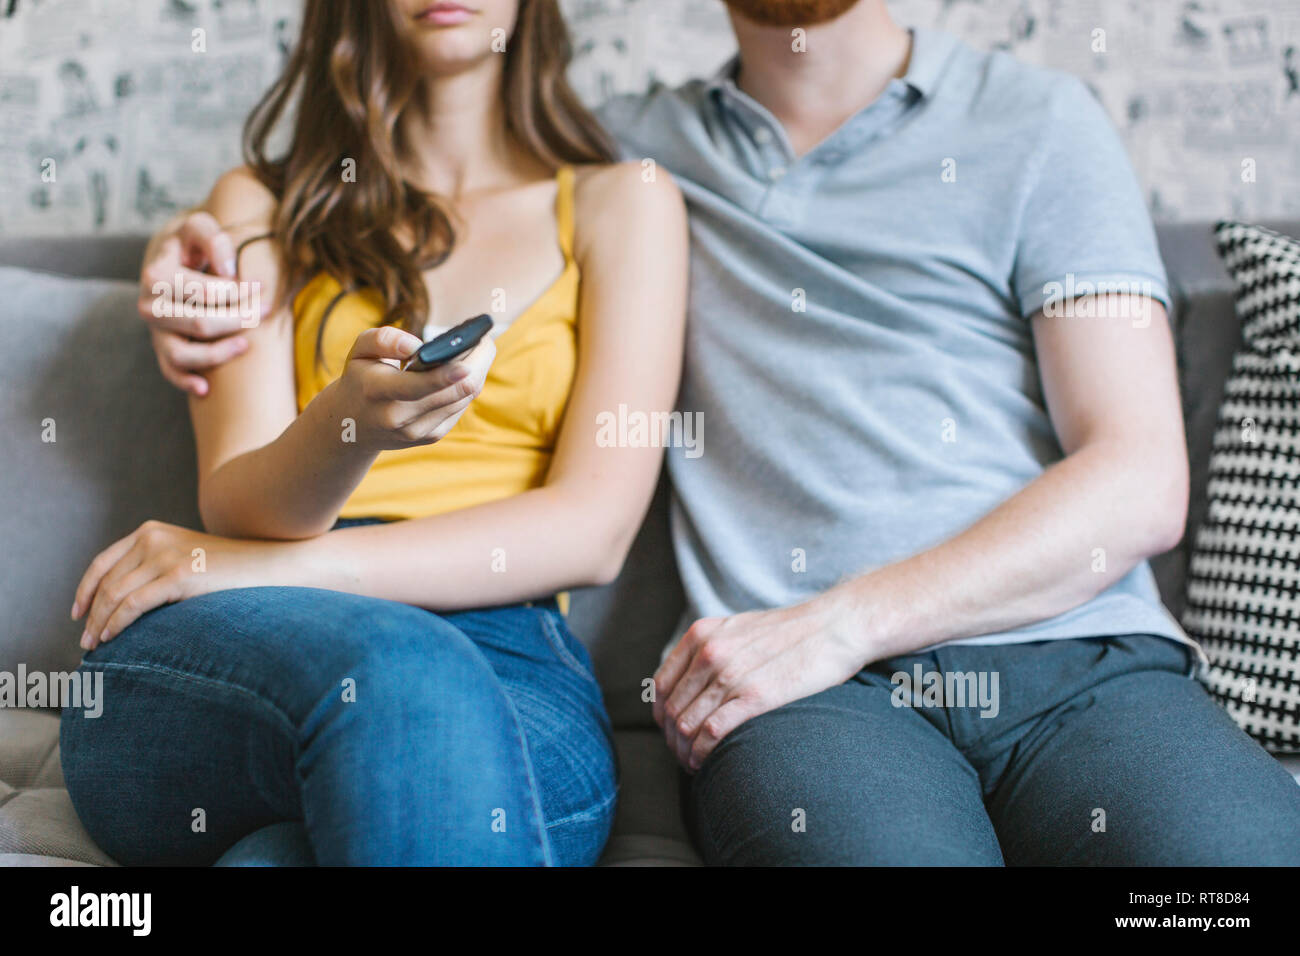 Couple sitting on couch watching TV, partial view Stock Photo